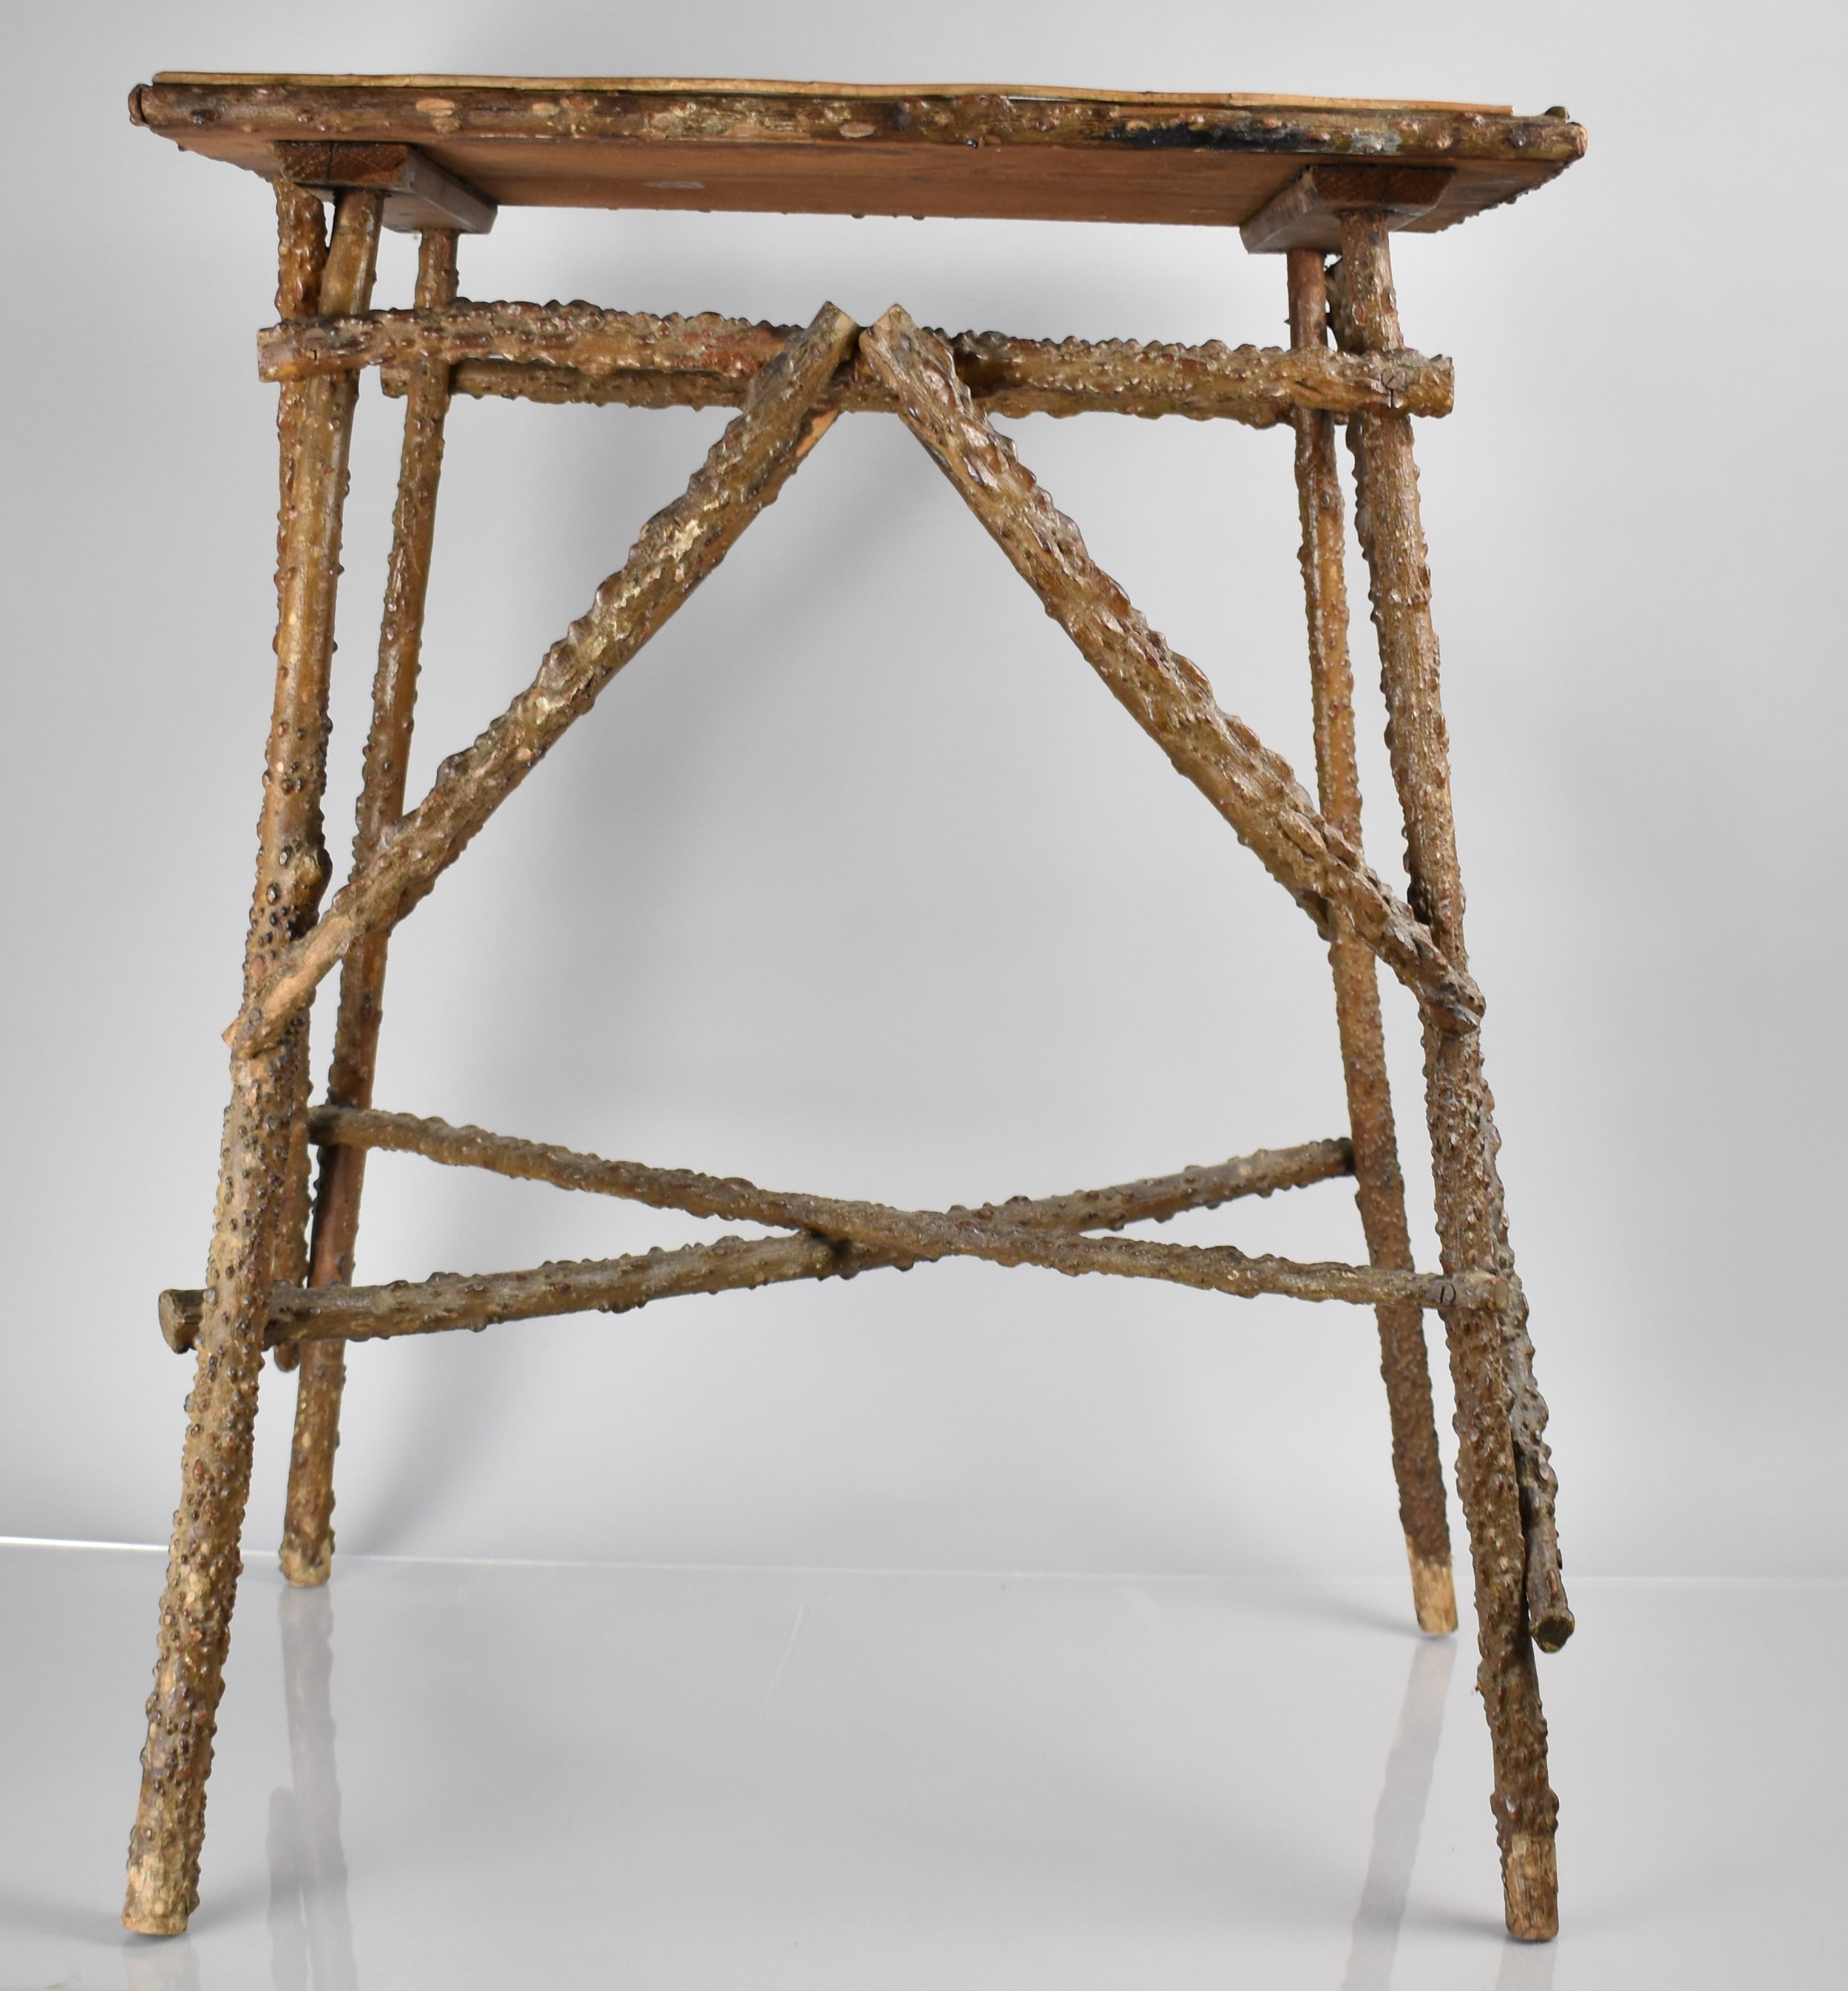 A Victorian Folk Art Winged Elm (Cork Elm) Occasional Table, 52x38x68cm High - Image 2 of 3